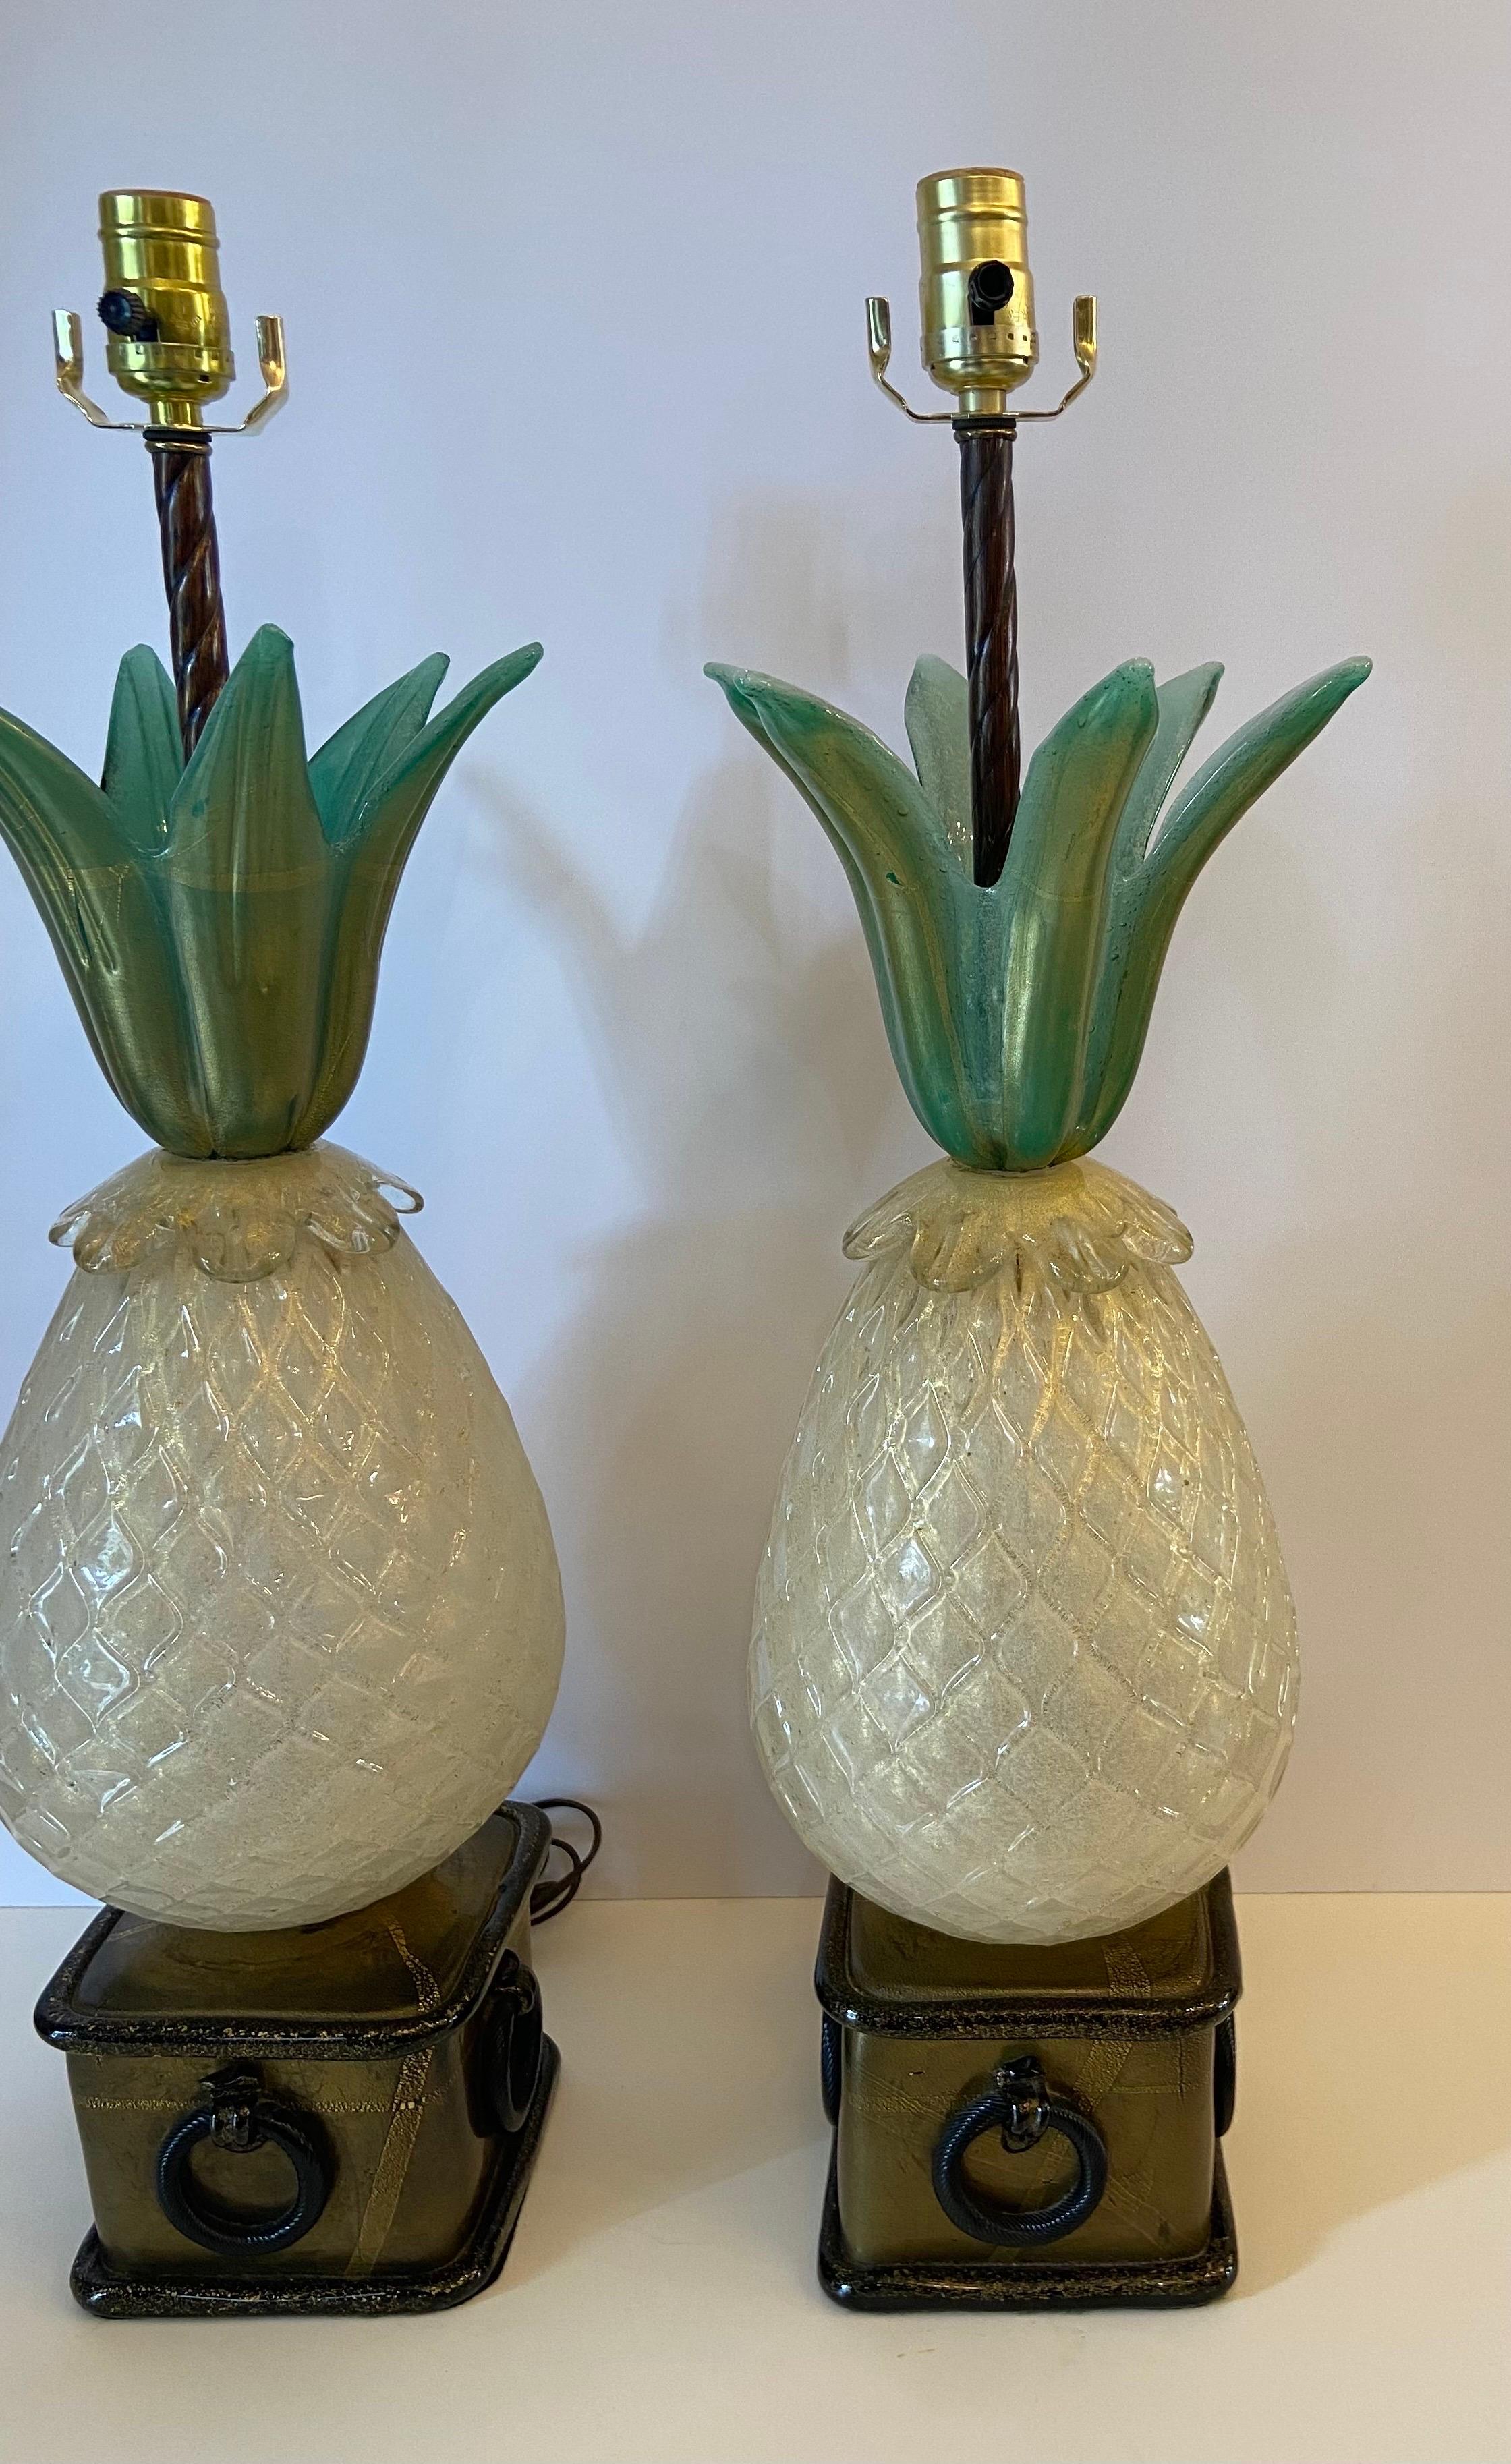 Pair of exquisite Murano pineapple form lamps circa 1950… pair of lamps recently acquired from the original family… They have been rewired cleaned and put back together professionally …everything is tight… The glass is free from any chips, nicks